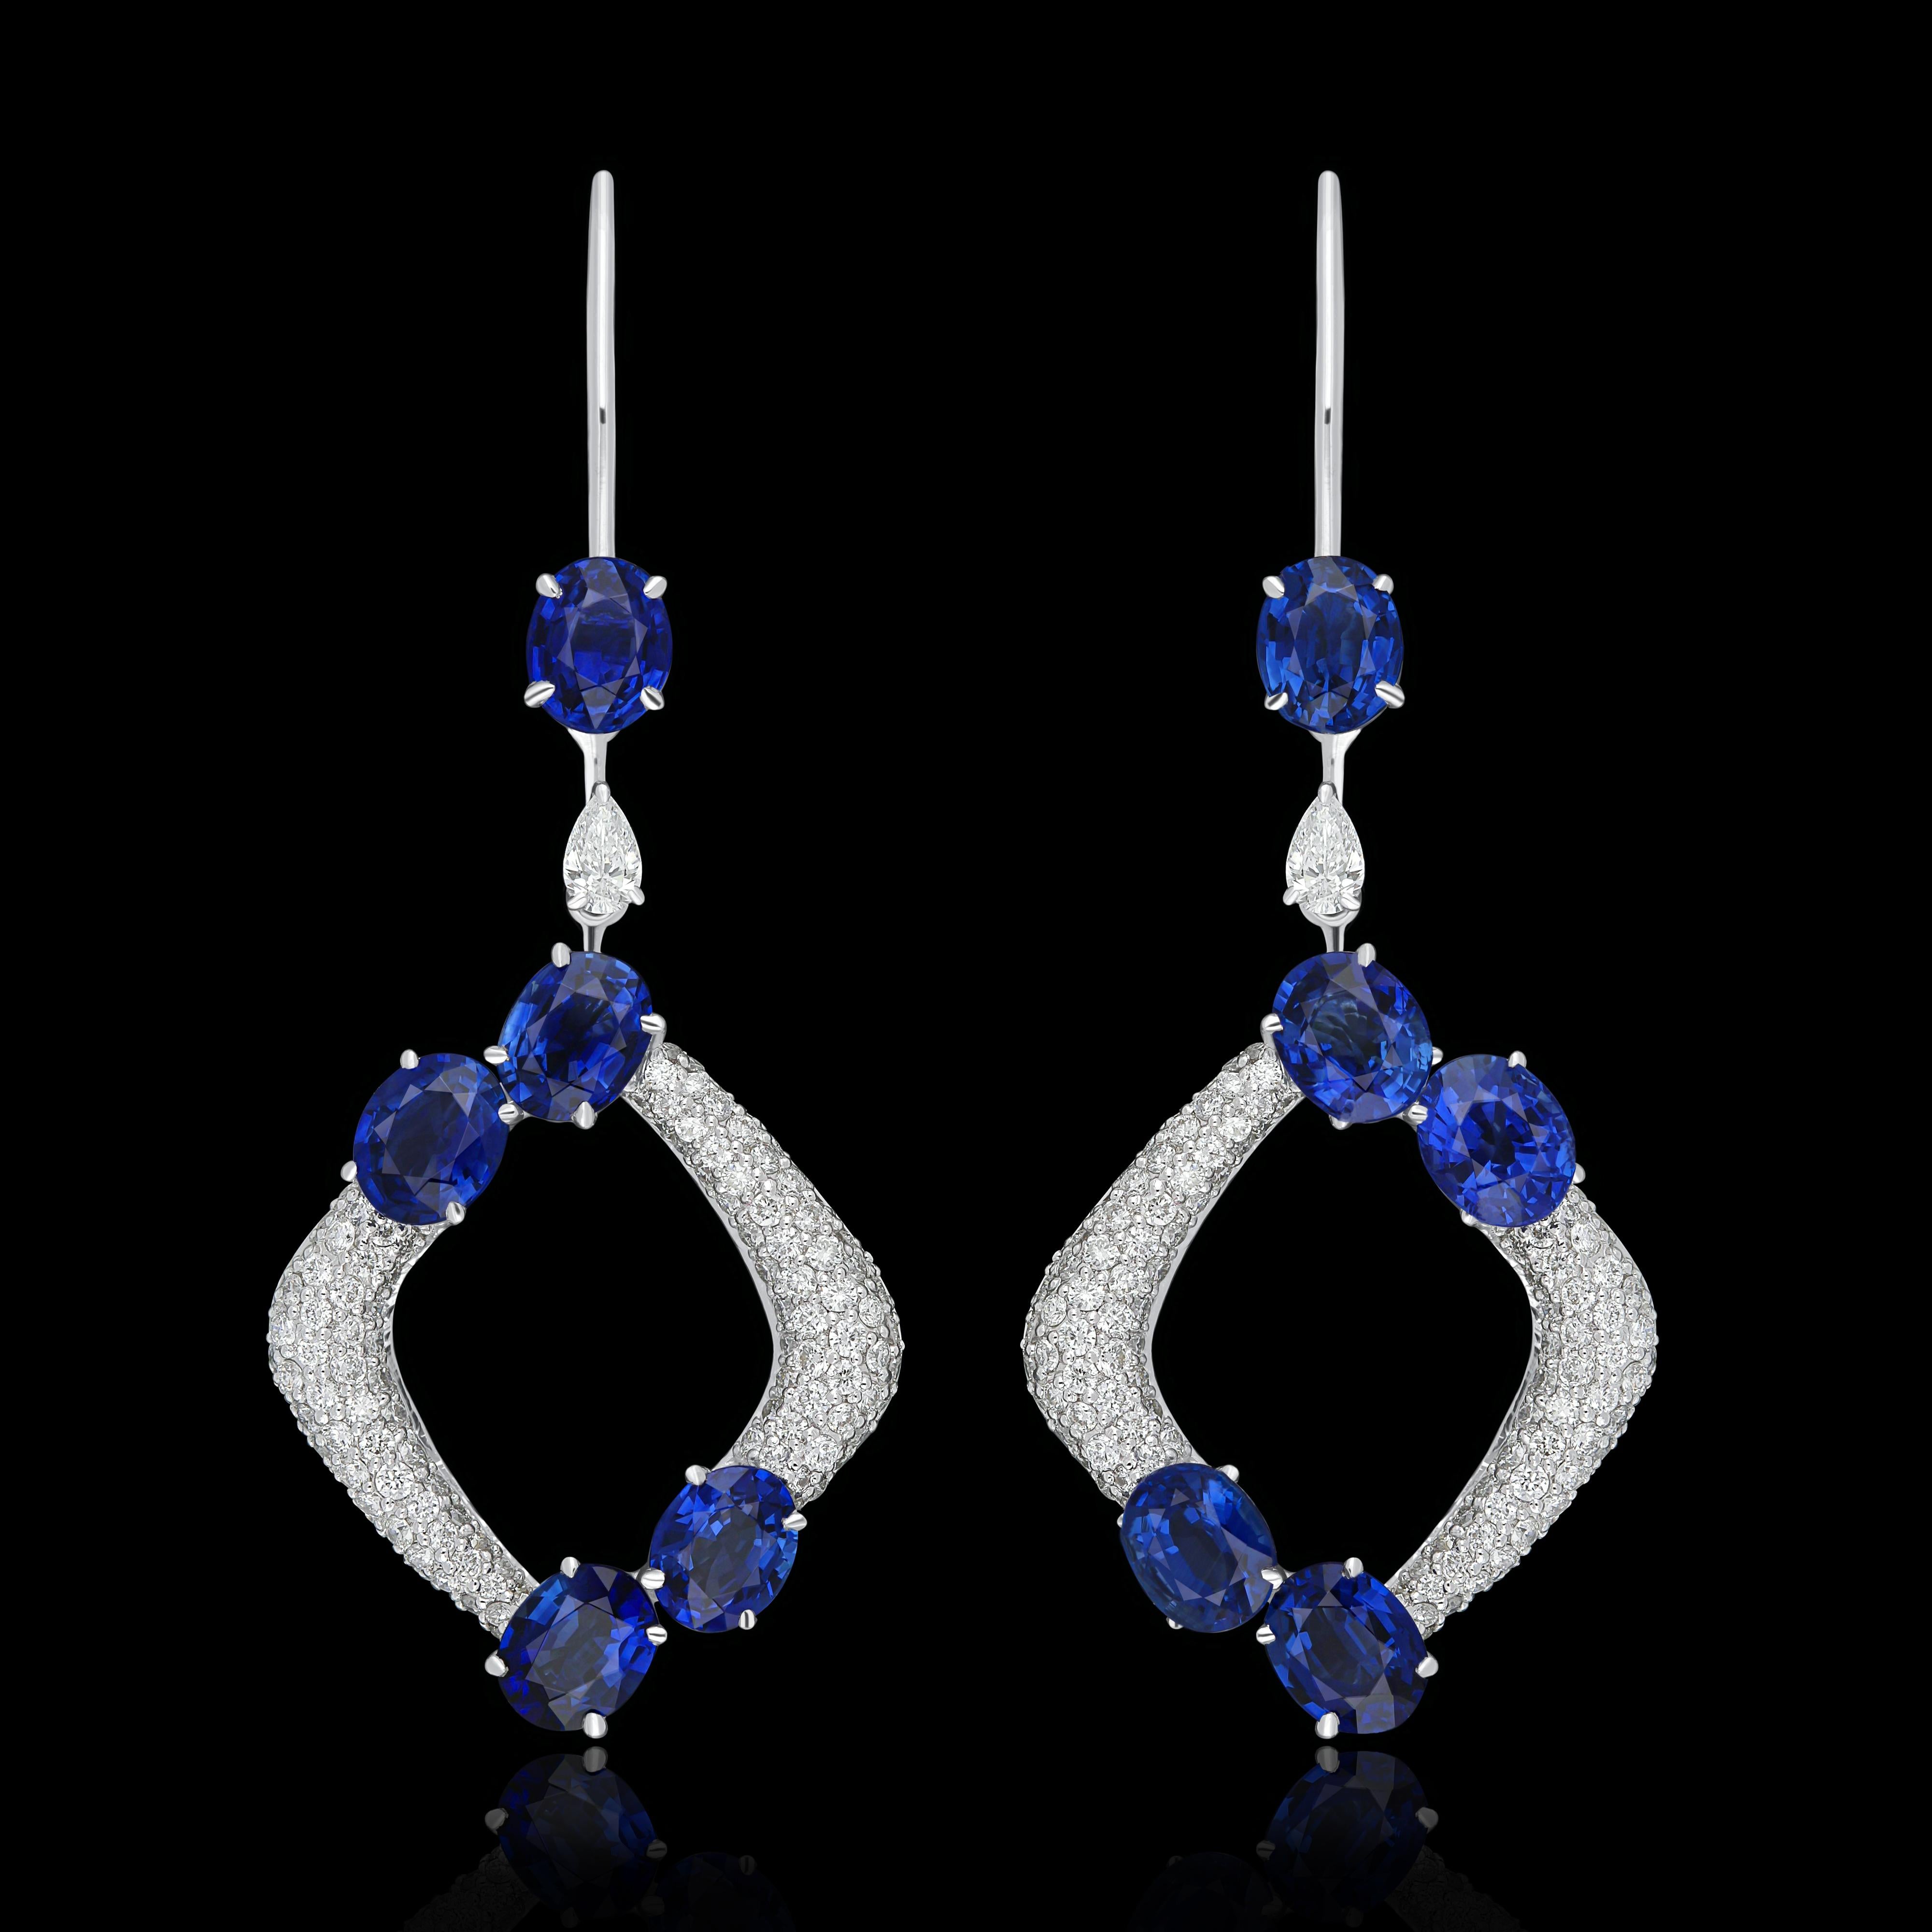 Elegant and exquisitely detailed 18 Karat White Gold Earring, center set with 4.55Cts .Oval Shape Blue Sapphire and micro pave set Diamonds, weighing approx. 0.99Cts Beautifully Hand crafted in 18 Karat White Gold.

Stone Detail:
Blue Sapphire: